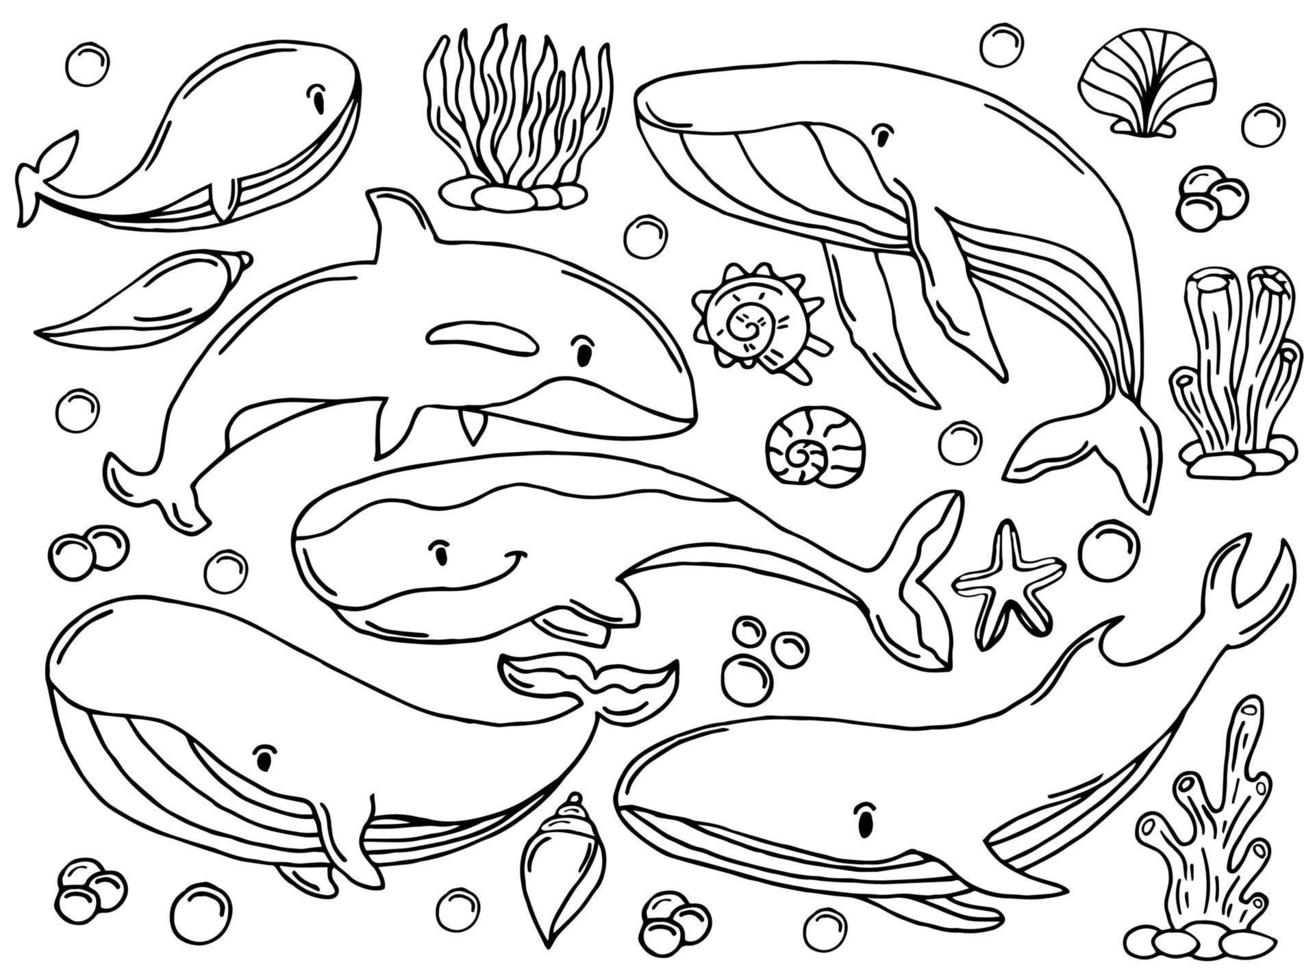 Whales color sketch set. Big collection of different hand drawn whales and dolphins in engraving style. Zoological illustration of ocean mammals vector